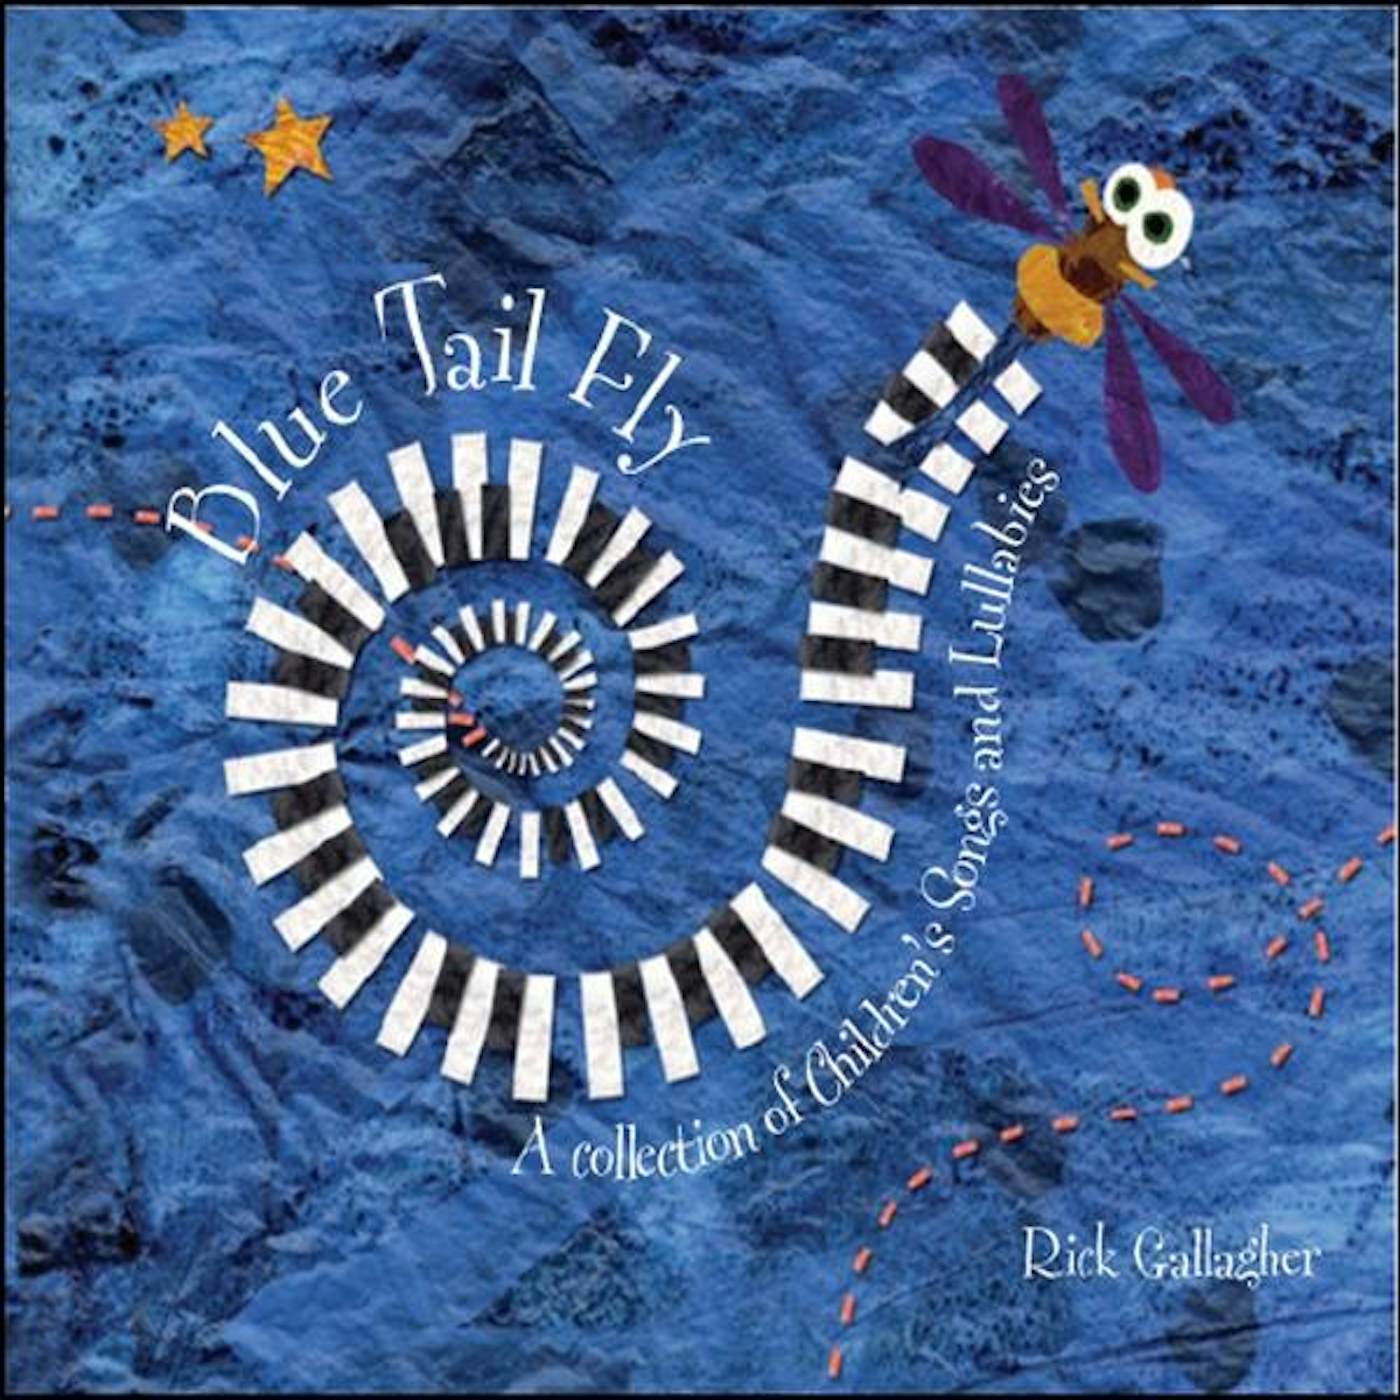 Rick Gallagher BLUE TAIL FLY CD